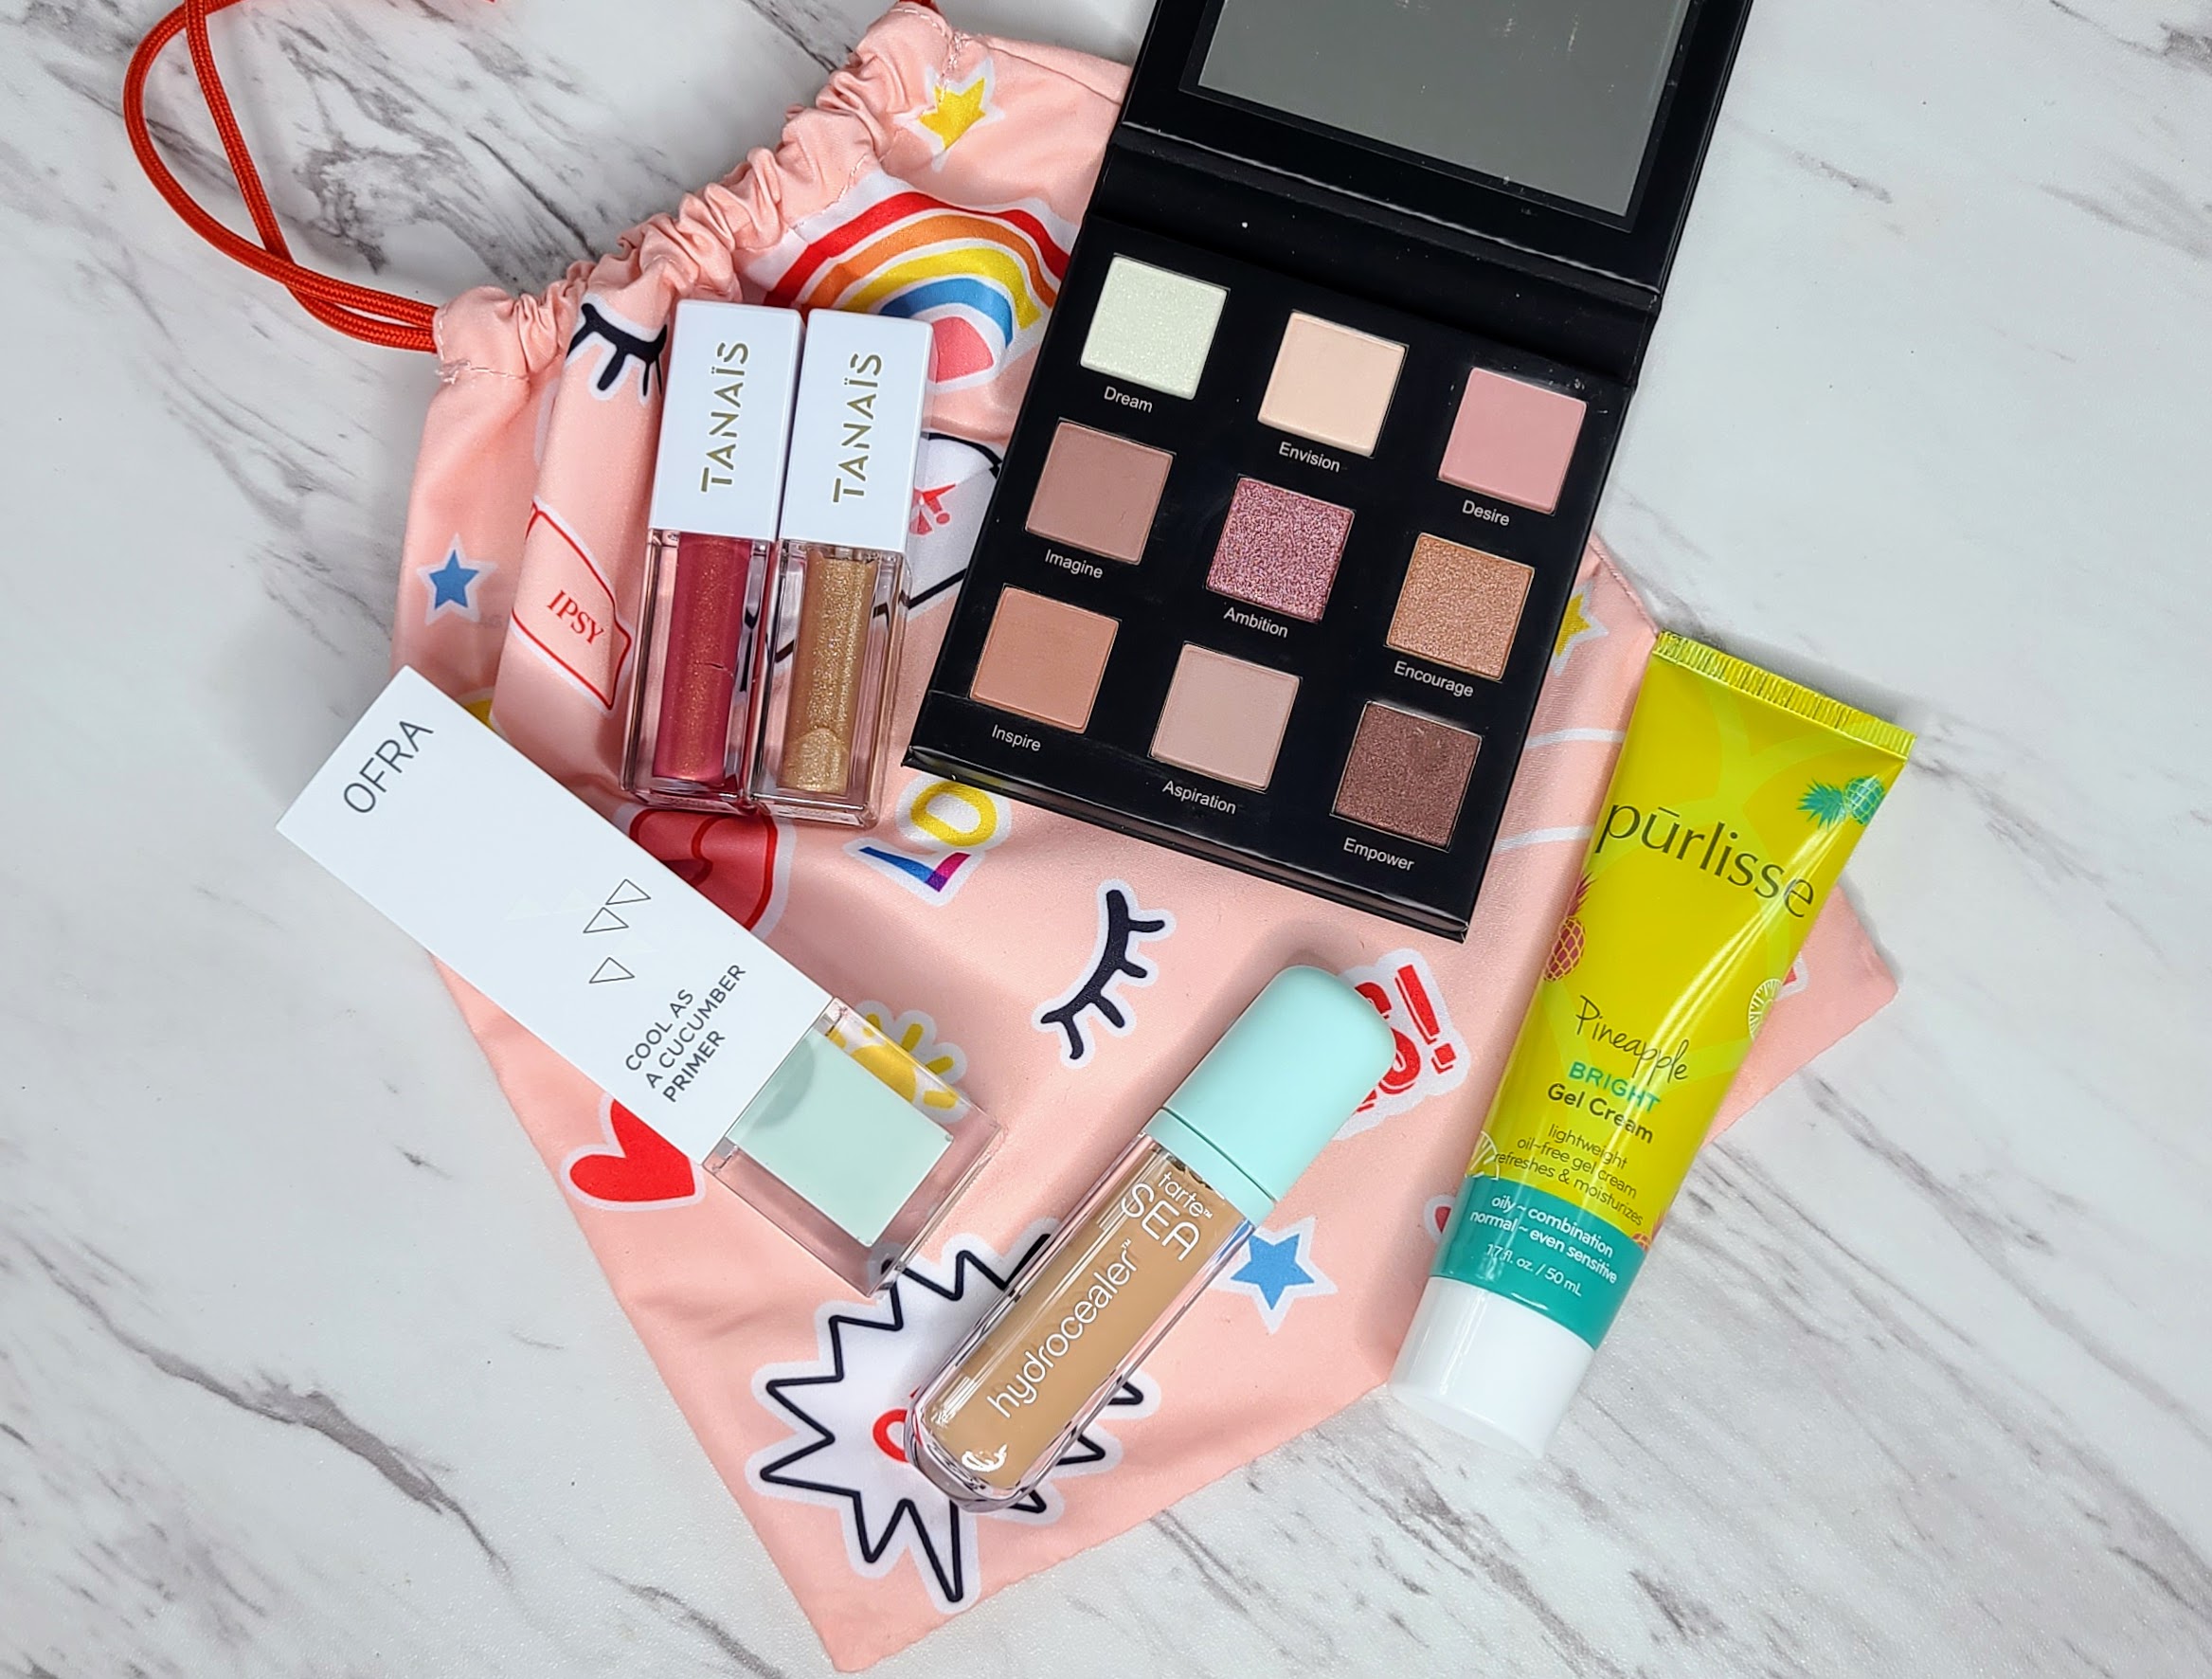 Ipsy Glam Bag Review - HubPages